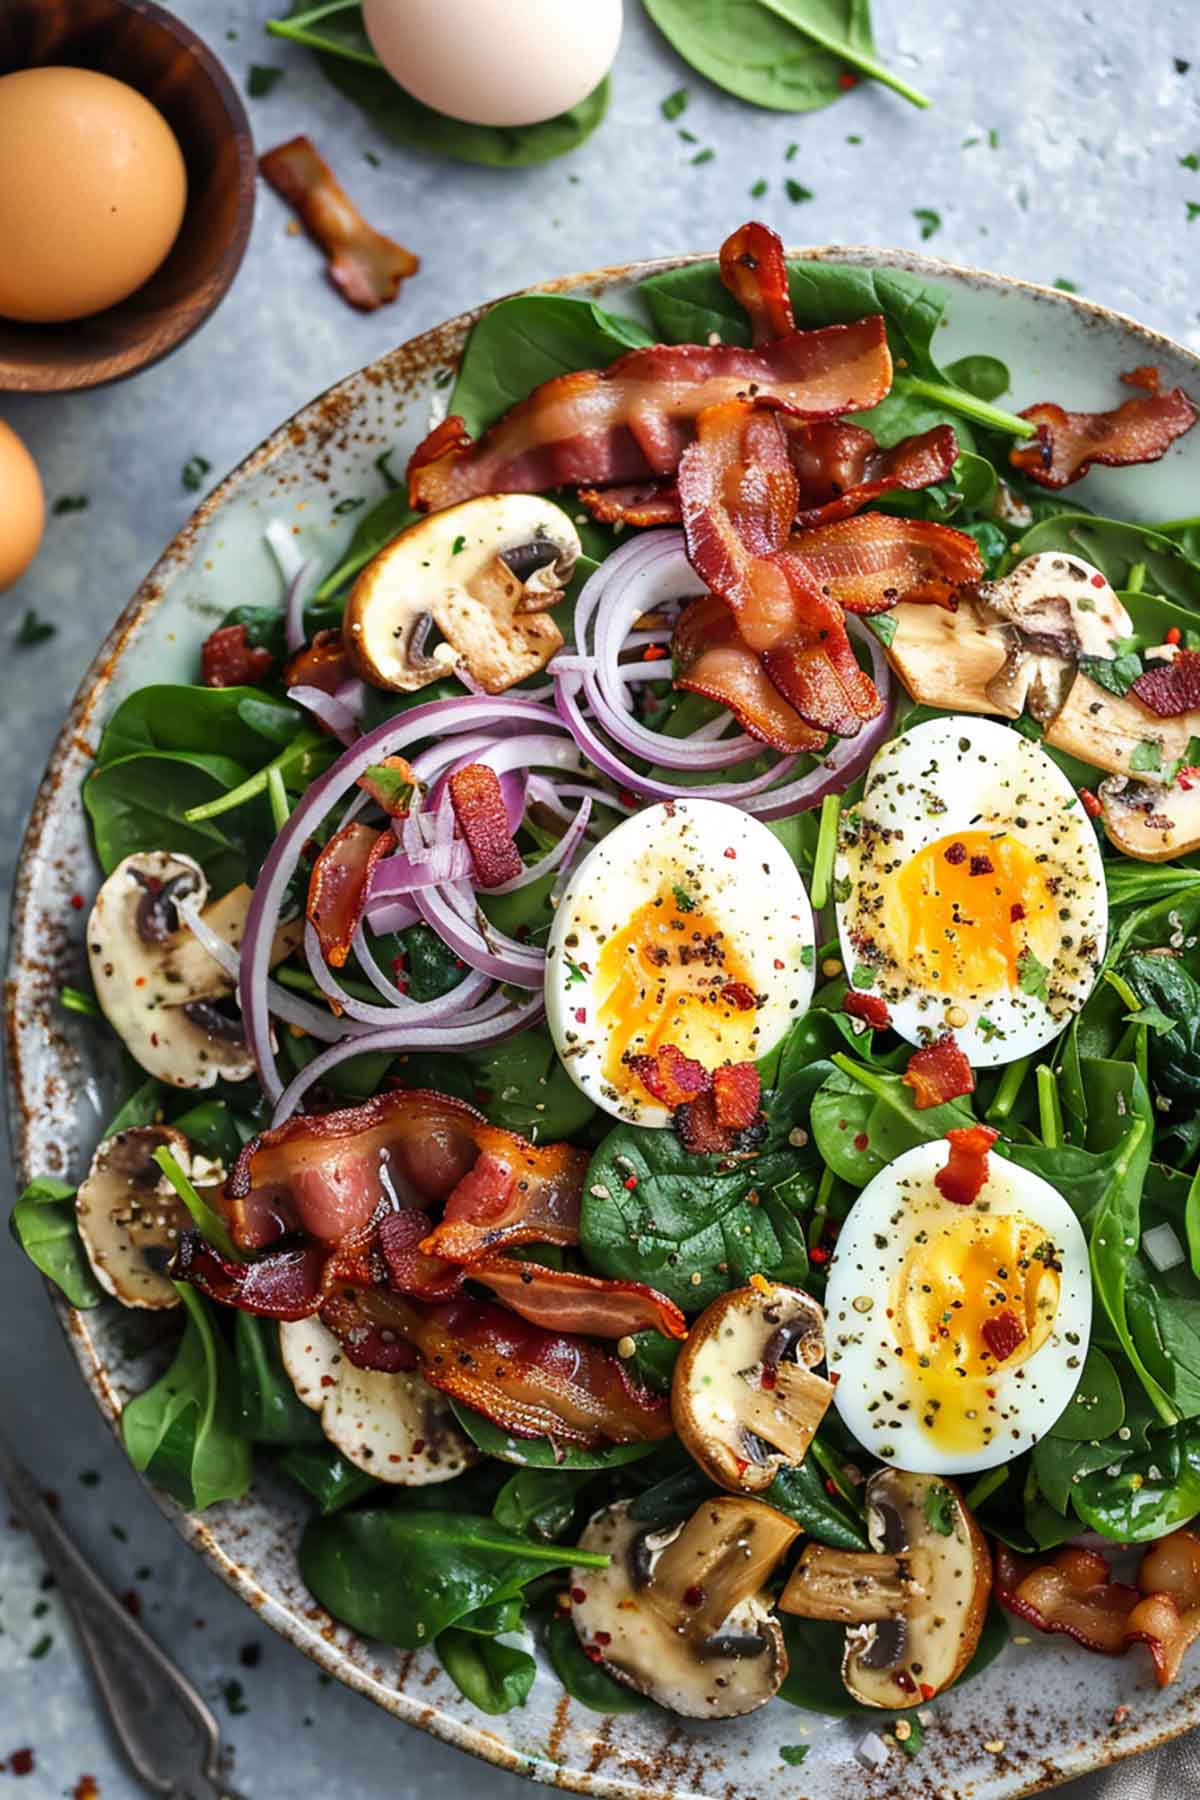 spinach salad with warm bacon dressing.